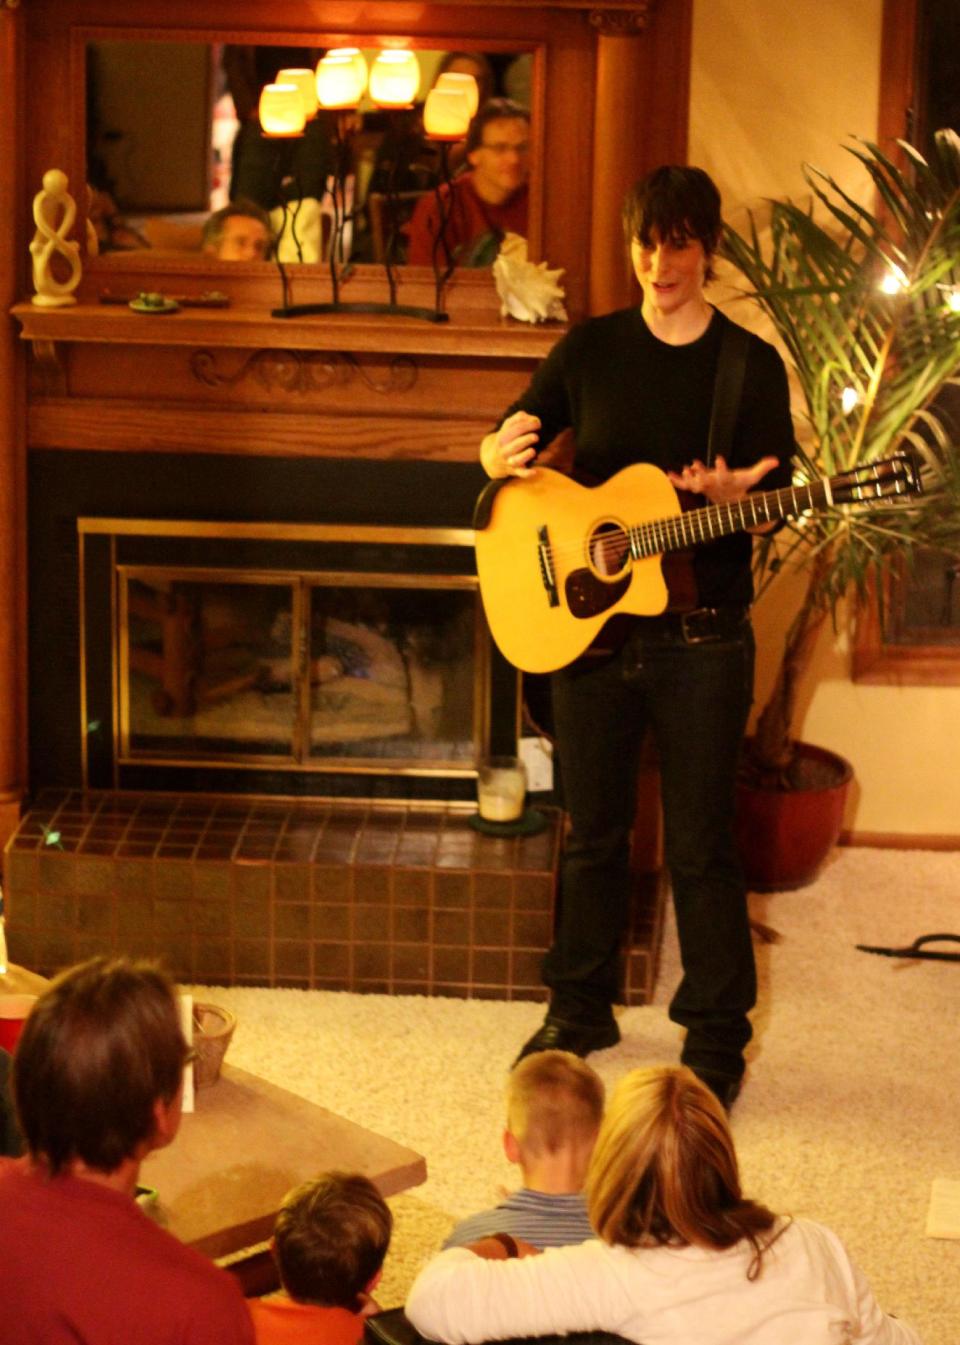 This Nov. 13, 2010 photo provided by Reggie Ruth Barrett shows singer-songwriter Ellis Delaney performing at a private residence The Pinery in Parker, Co. Enjoying live music at home is nothing new, whether it harks back to the humble notion of friends singing and playing instruments together at home, or to Europe's legendary salons full of writers, artists and musicians. House shows, or living-room shows, continue to bring satisfaction today to many music lovers and to amateur and professional musicians. (AP Photo/Reggie Ruth Barrett)